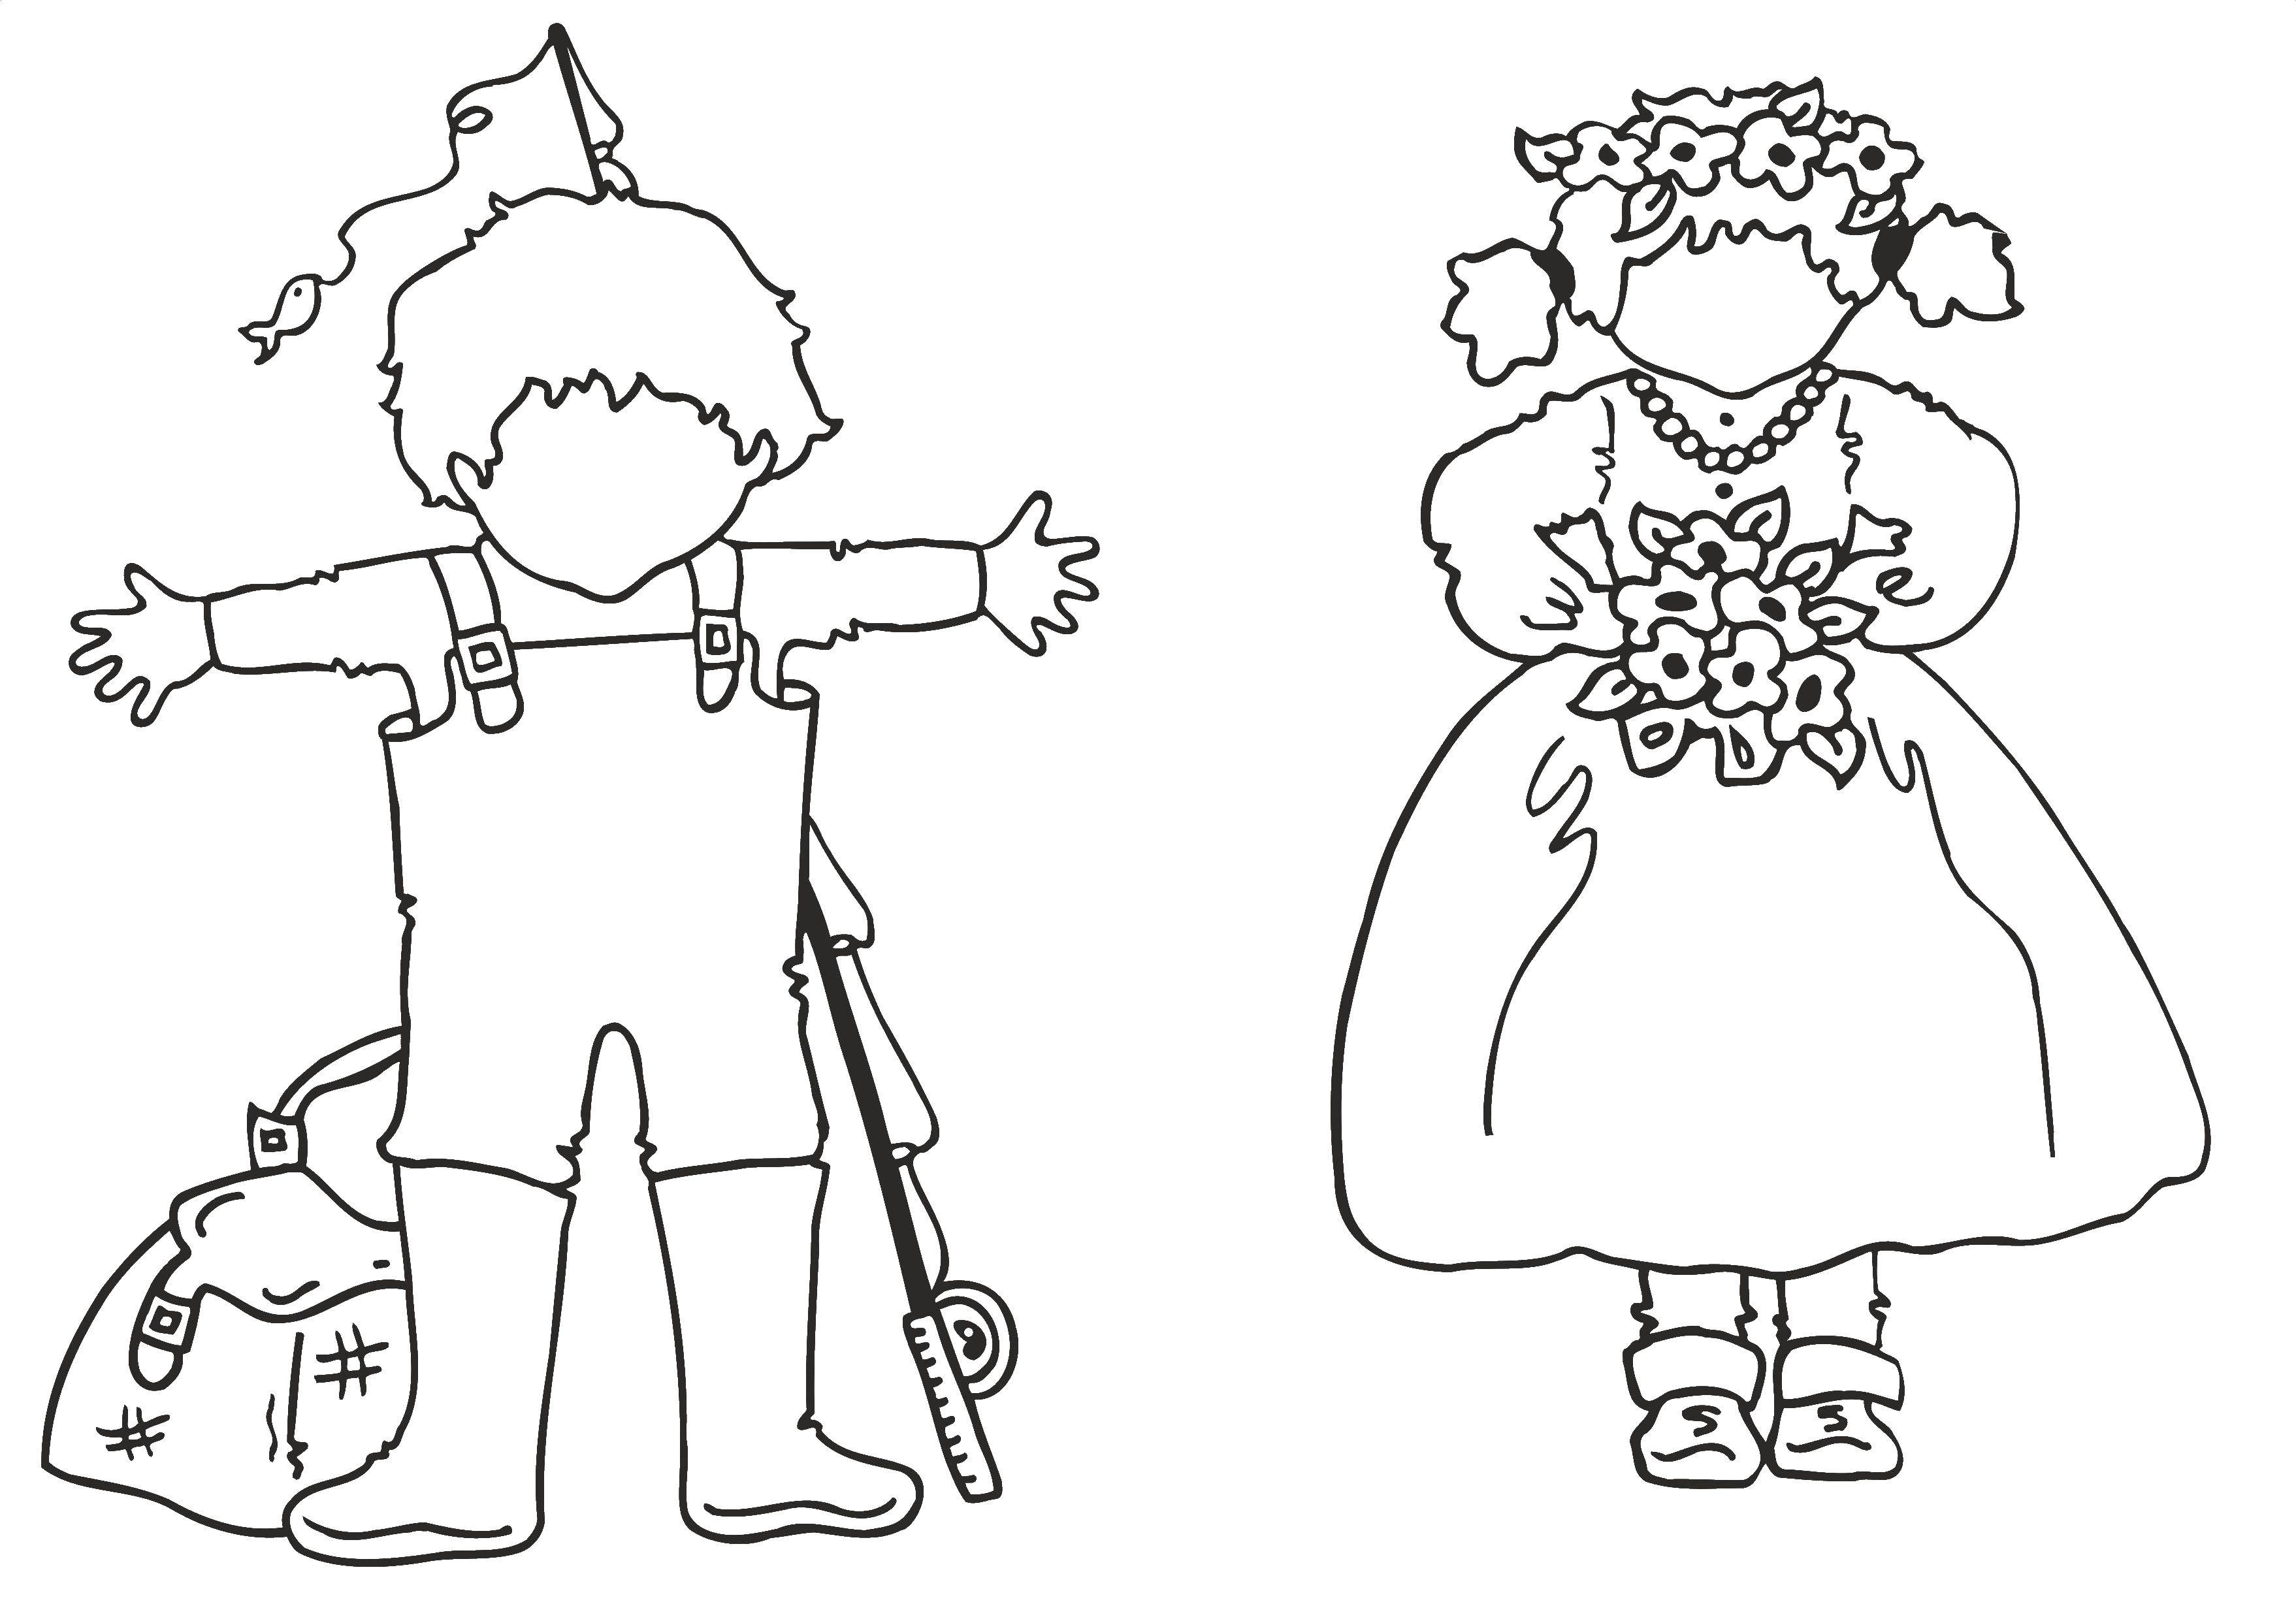 Coloring Children in costumes. Category coloring. Tags:  children, costume.